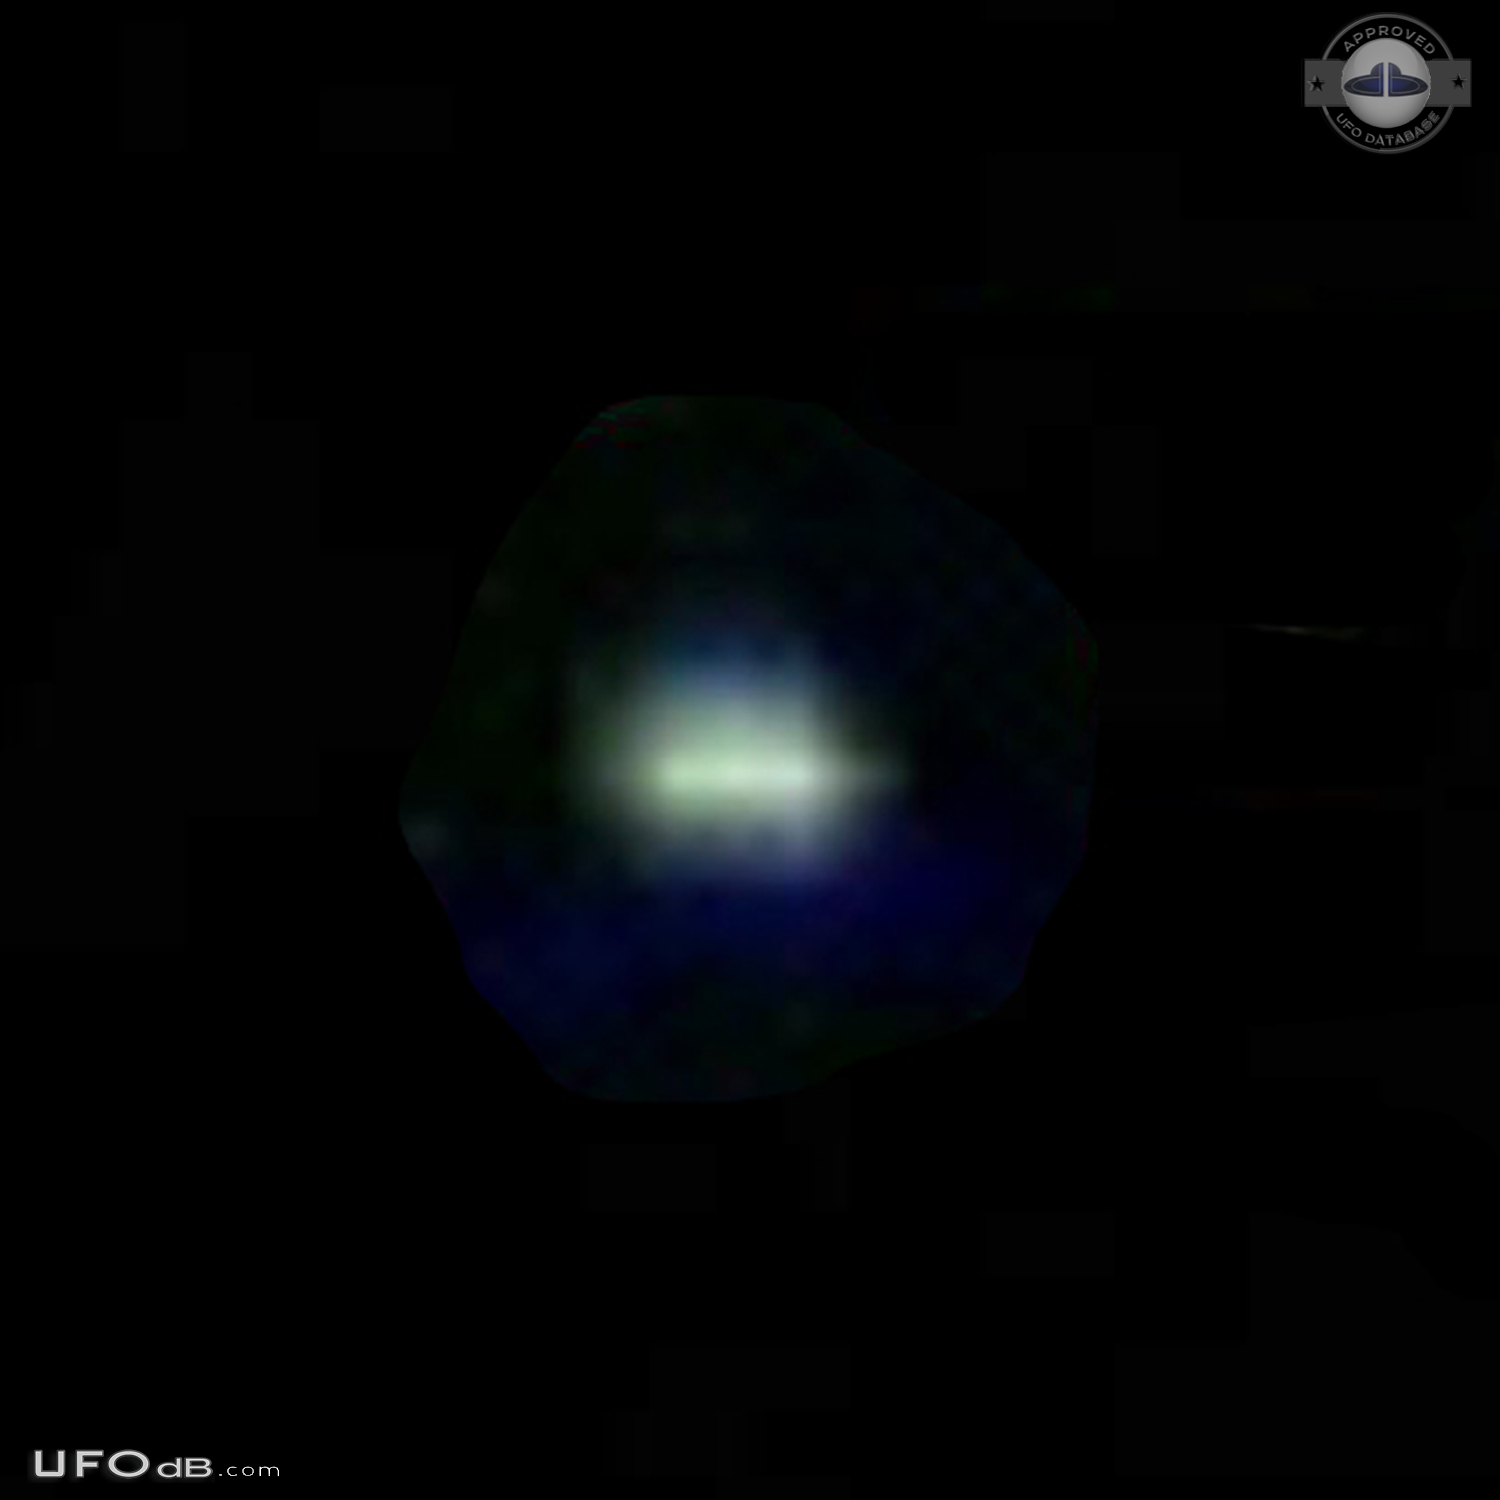 Bright object in the sky that seems to be UFO - Barrie Ontario 2007 UFO Picture #689-3